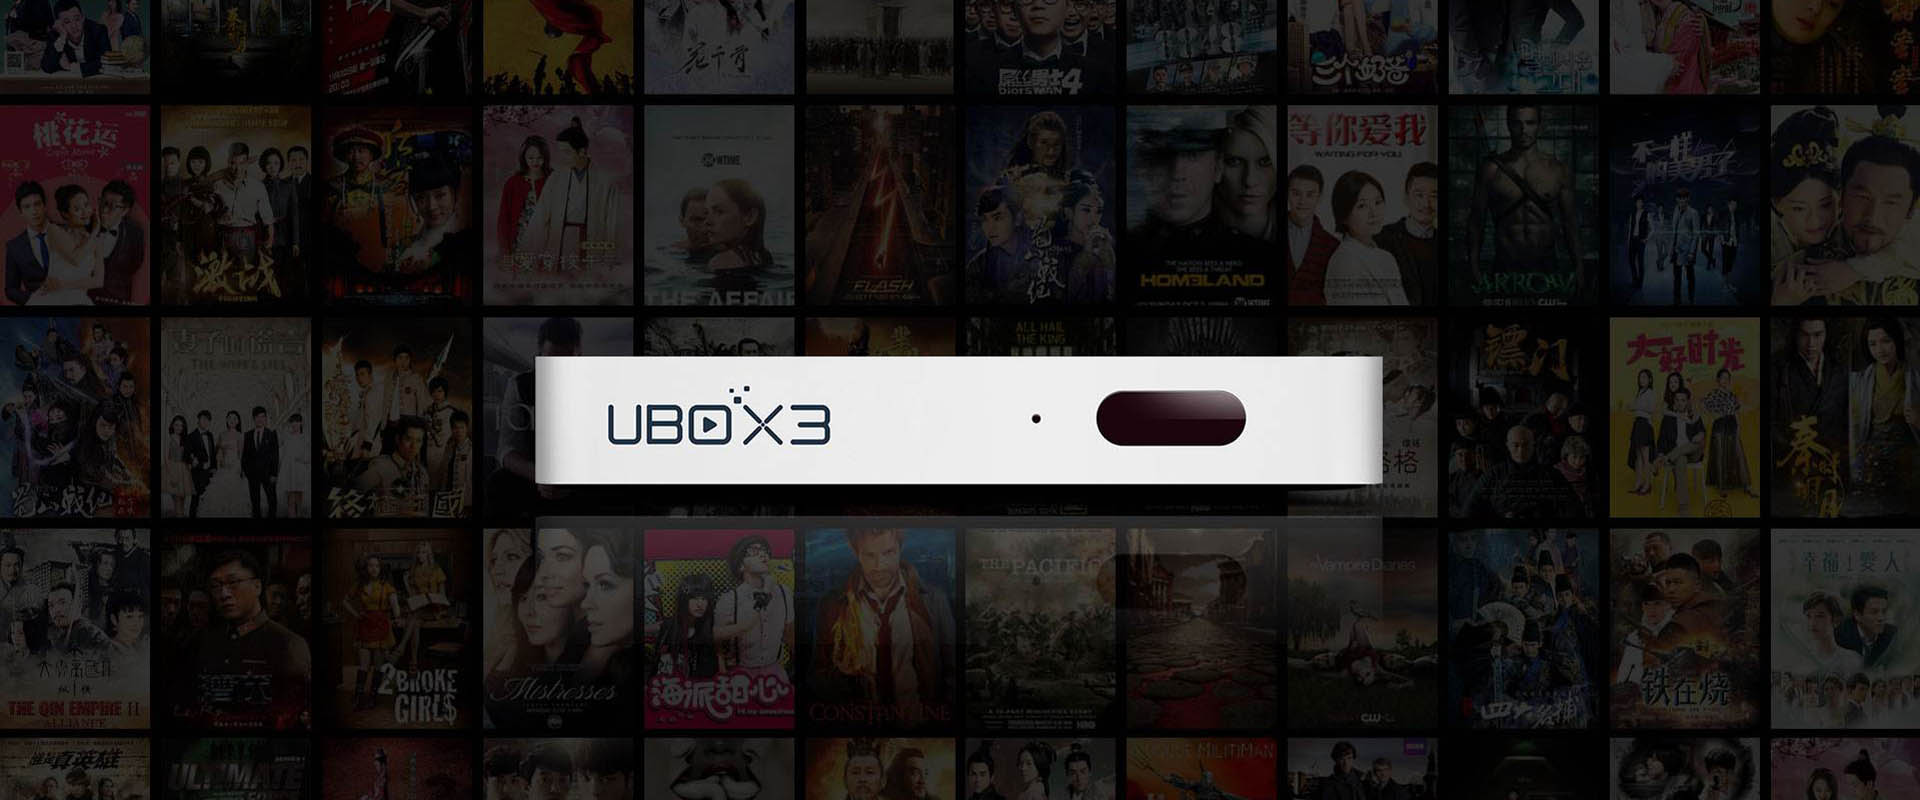 TV Box UBOX 3 - Watch FreeTV Shows from the Mainland of China